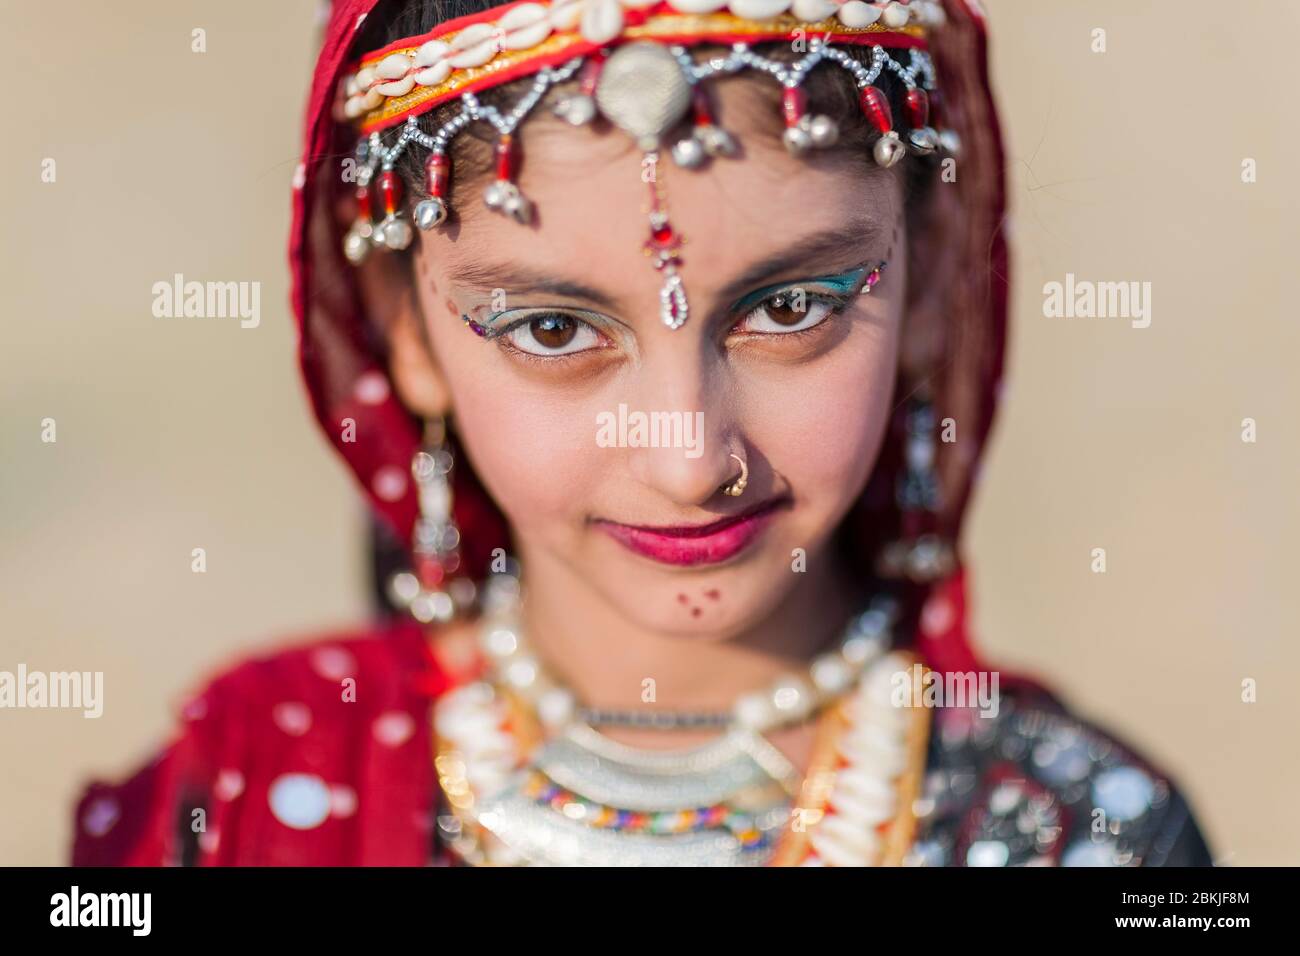 India, Rajasthan, Bikaner, Camel Festival, portrait of a young girl with a piercing gaze Stock Photo